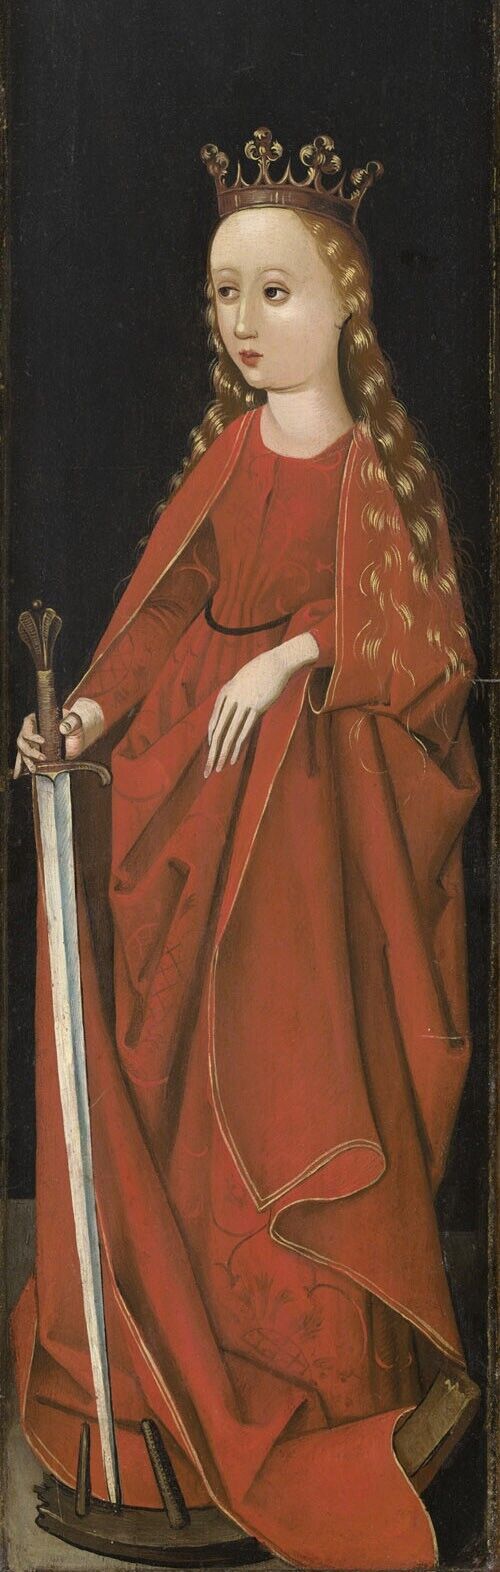 Saint-Catherine-right-wing-exterior-1480-1490-Master-of-the-Starck-Triptych-48\